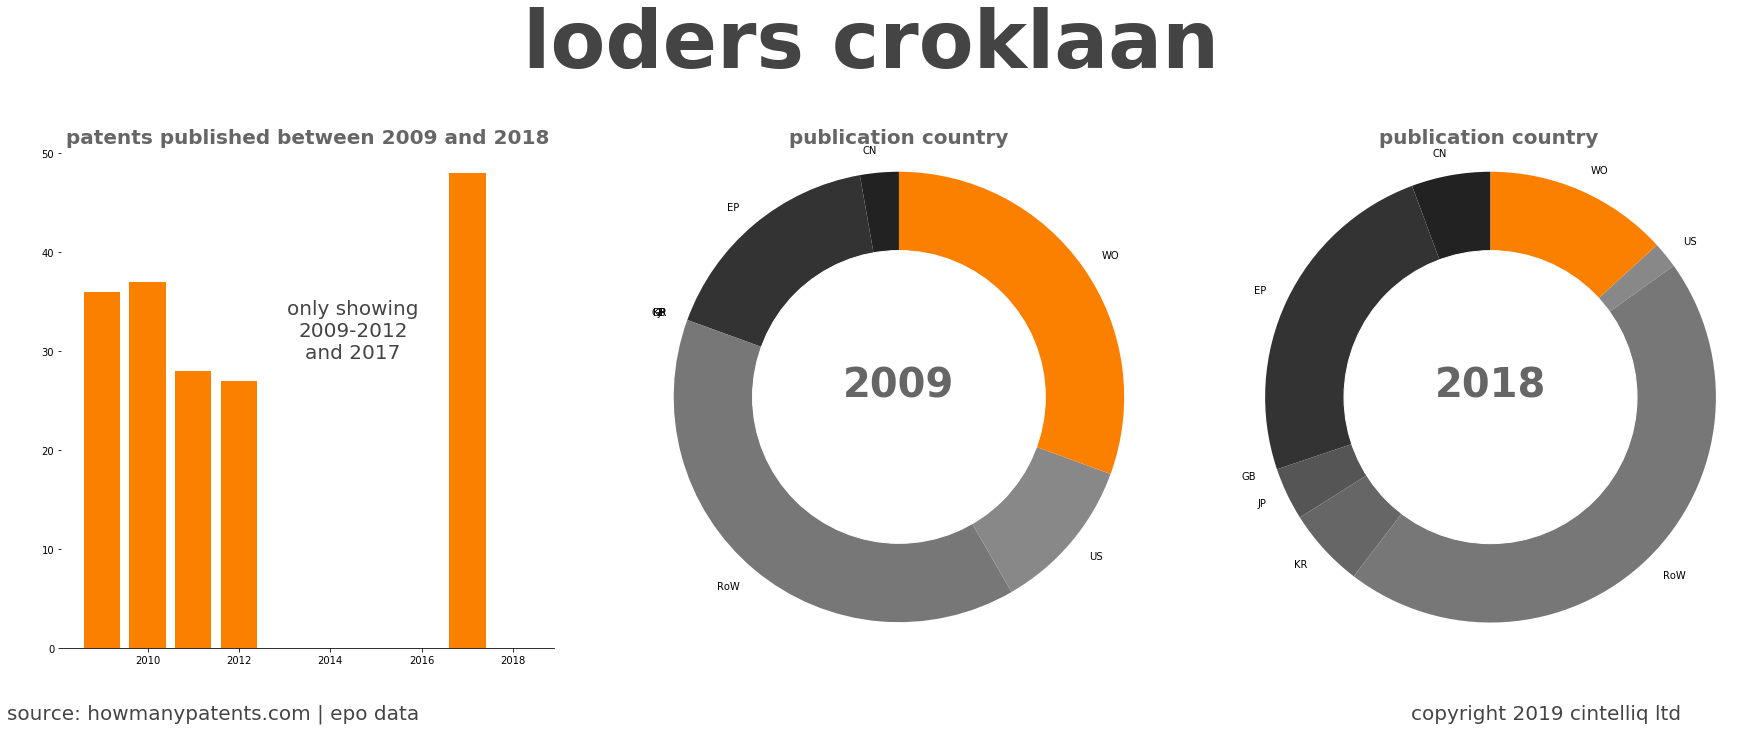 summary of patents for Loders Croklaan